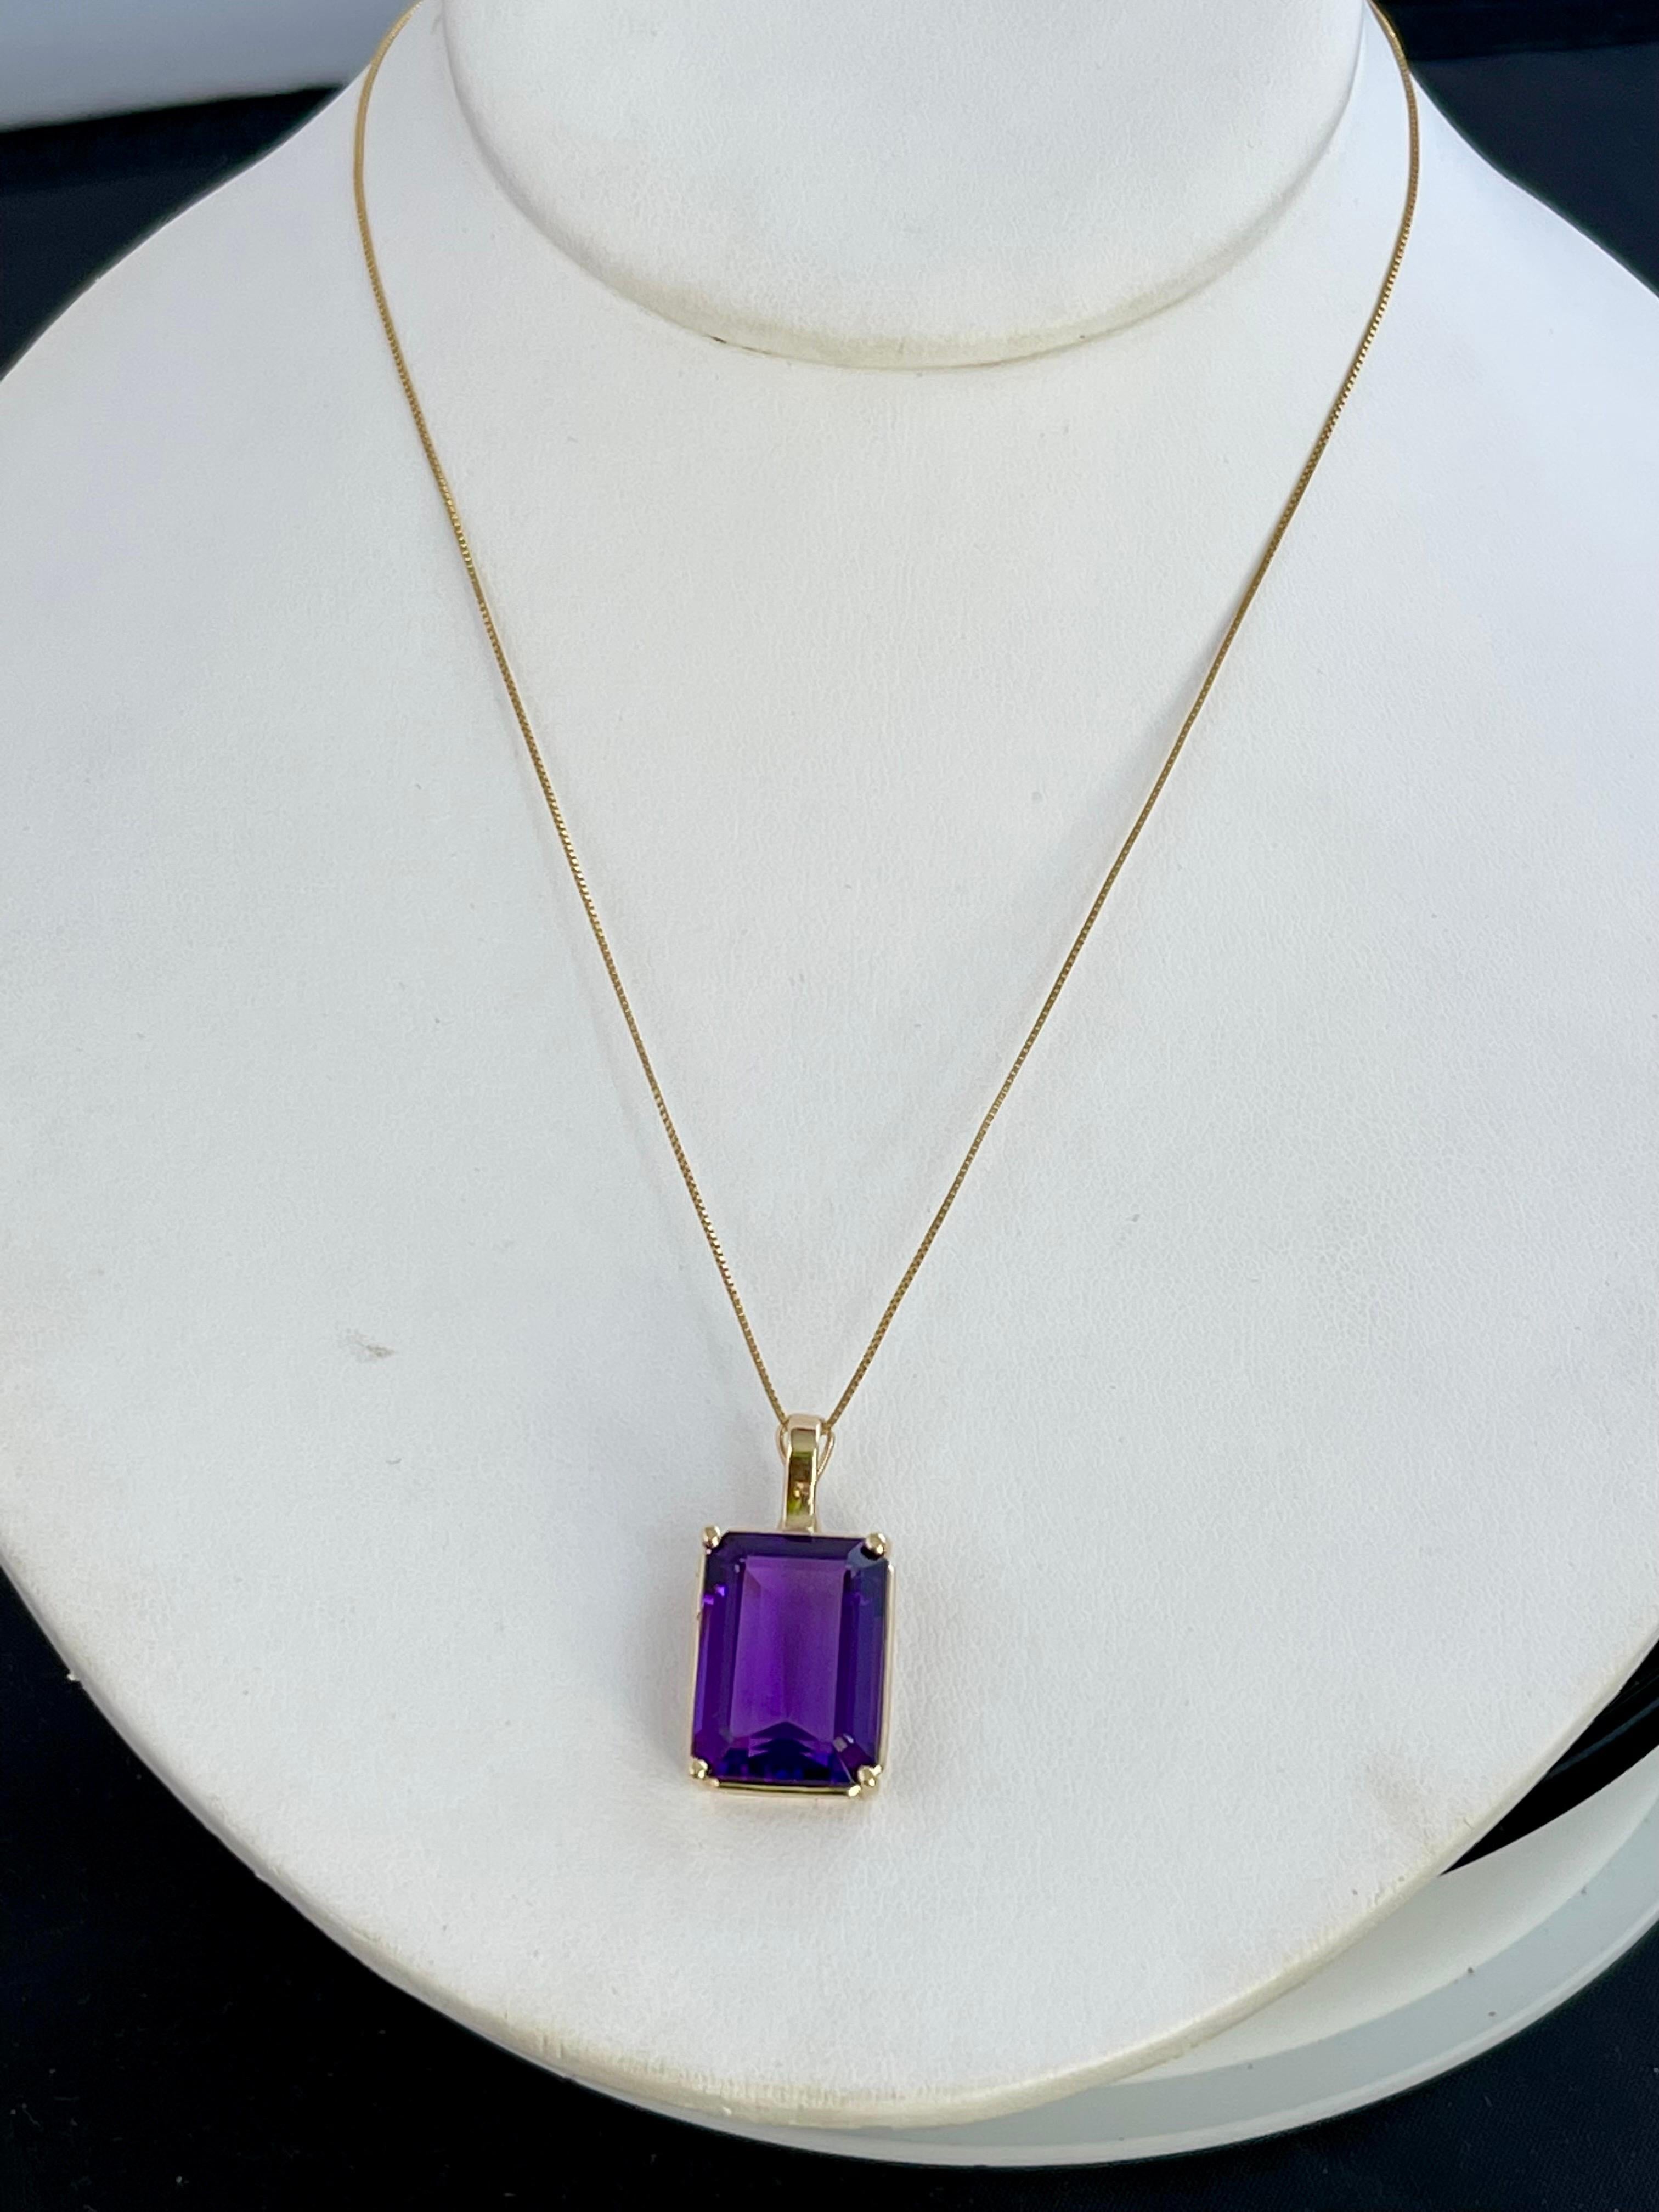 14 Ct Emerald Cut Amethyst Pendant/Neck 18Kt  Gold + 14 Kt Yellow Gold Chain For Sale 2